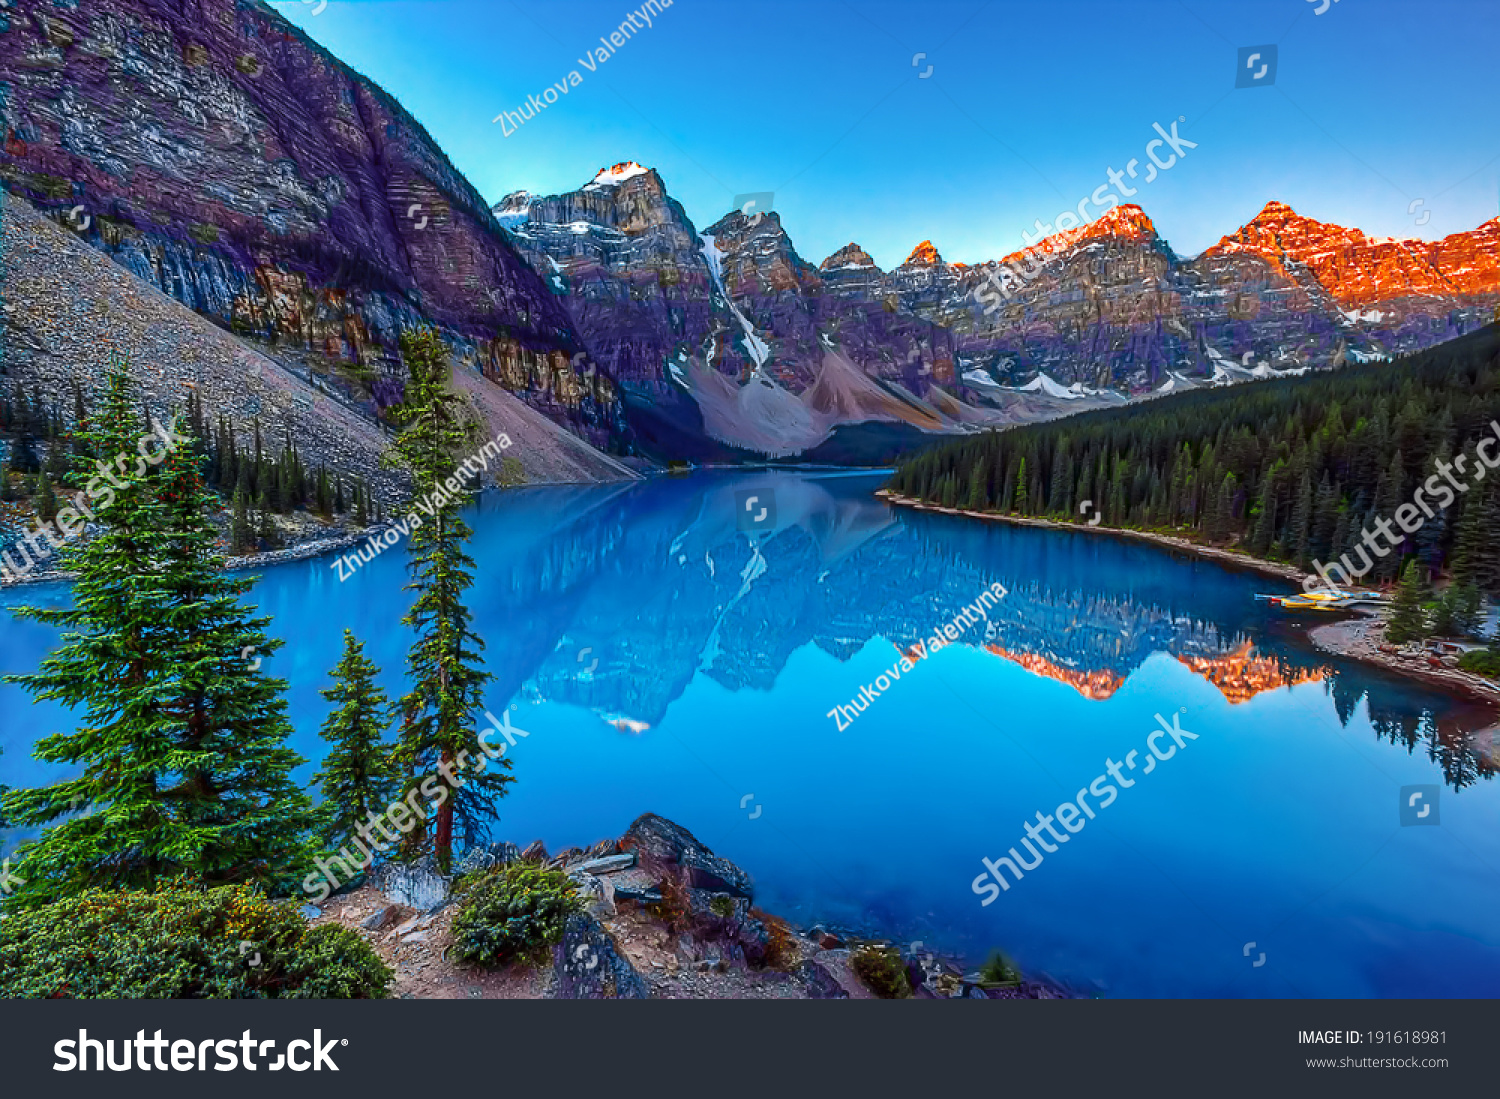  Moraine lake in Banff National Park, Canada,  Valley of the Ten Peaks #191618981